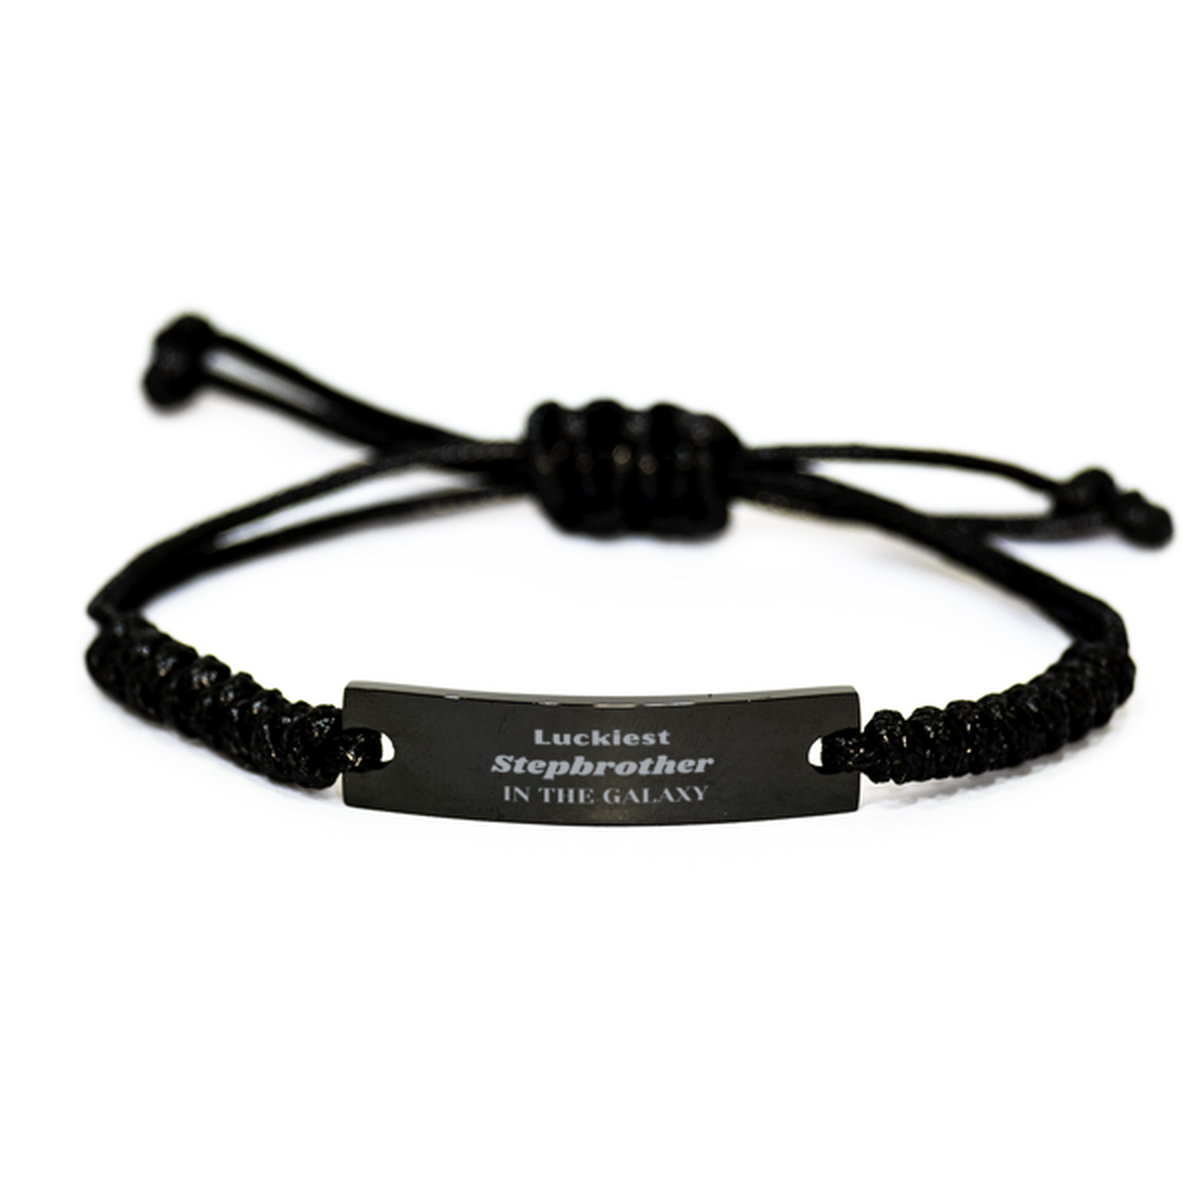 Luckiest Stepbrother in the Galaxy, To My Stepbrother Engraved Gifts, Christmas Stepbrother Black Rope Bracelet Gifts, X-mas Birthday Unique Gifts For Stepbrother Men Women